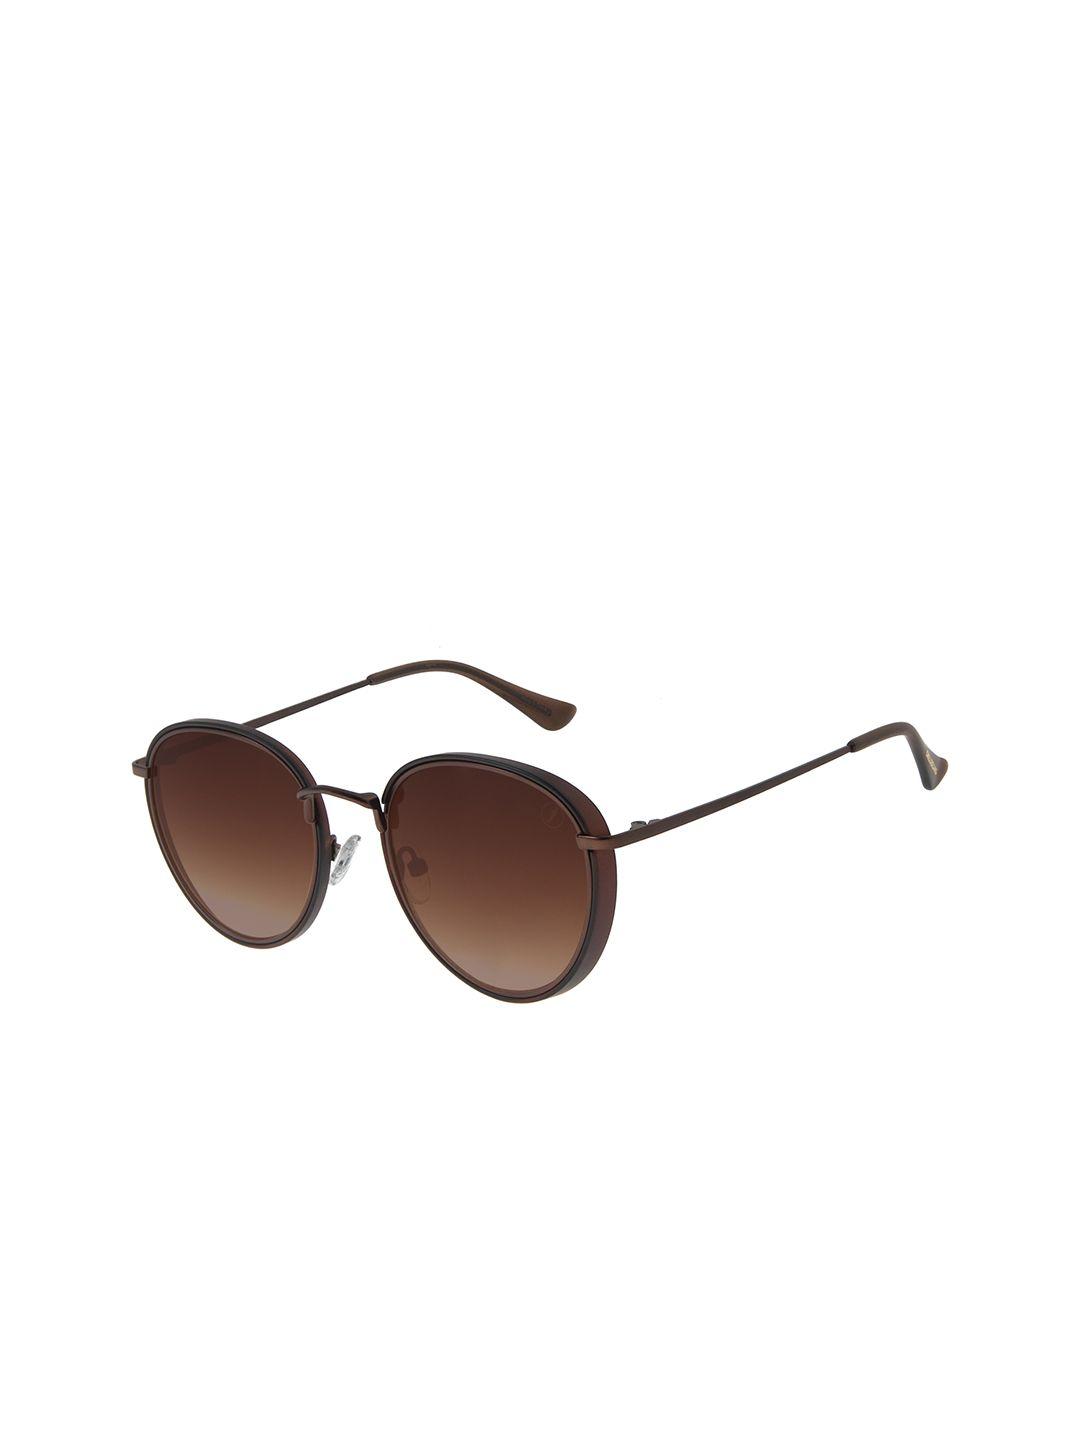 Chilli Beans Unisex Bronze & Brown Round Sunglasses with UV Protected Lens